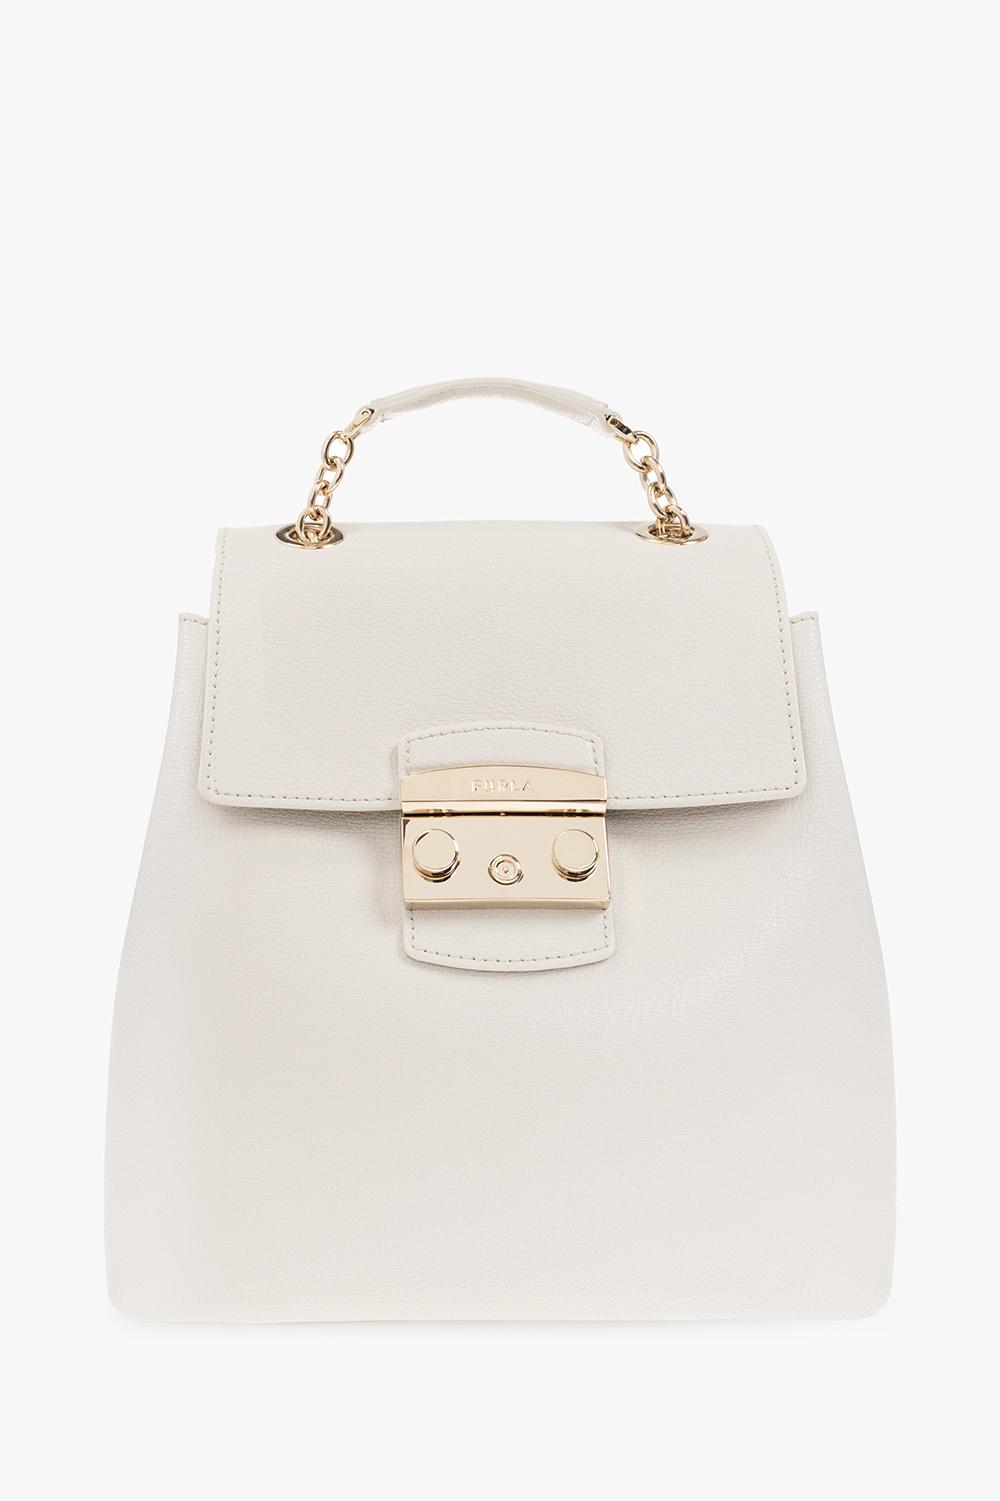 Furla 'metropolis Small' Leather Backpack in White | Lyst Canada